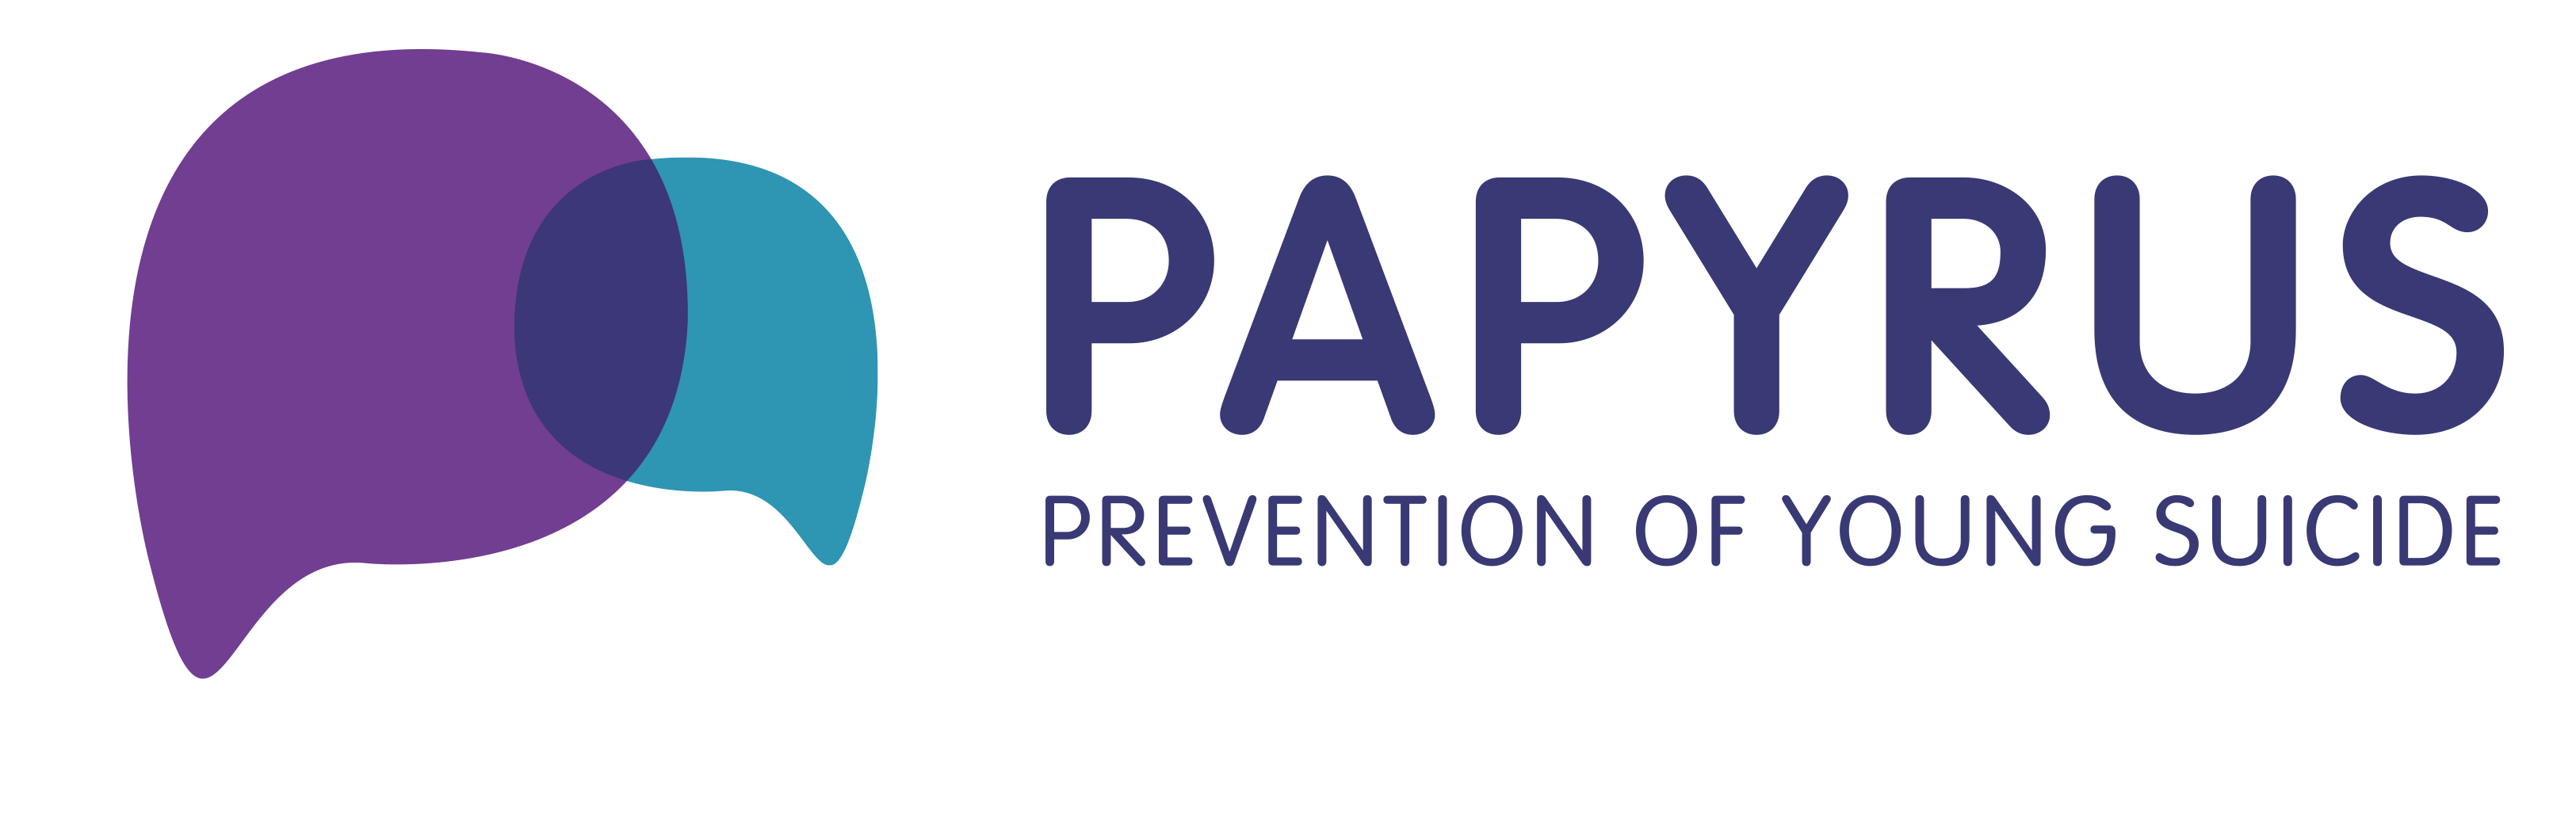 Papyrus Prevention of young suicide logo